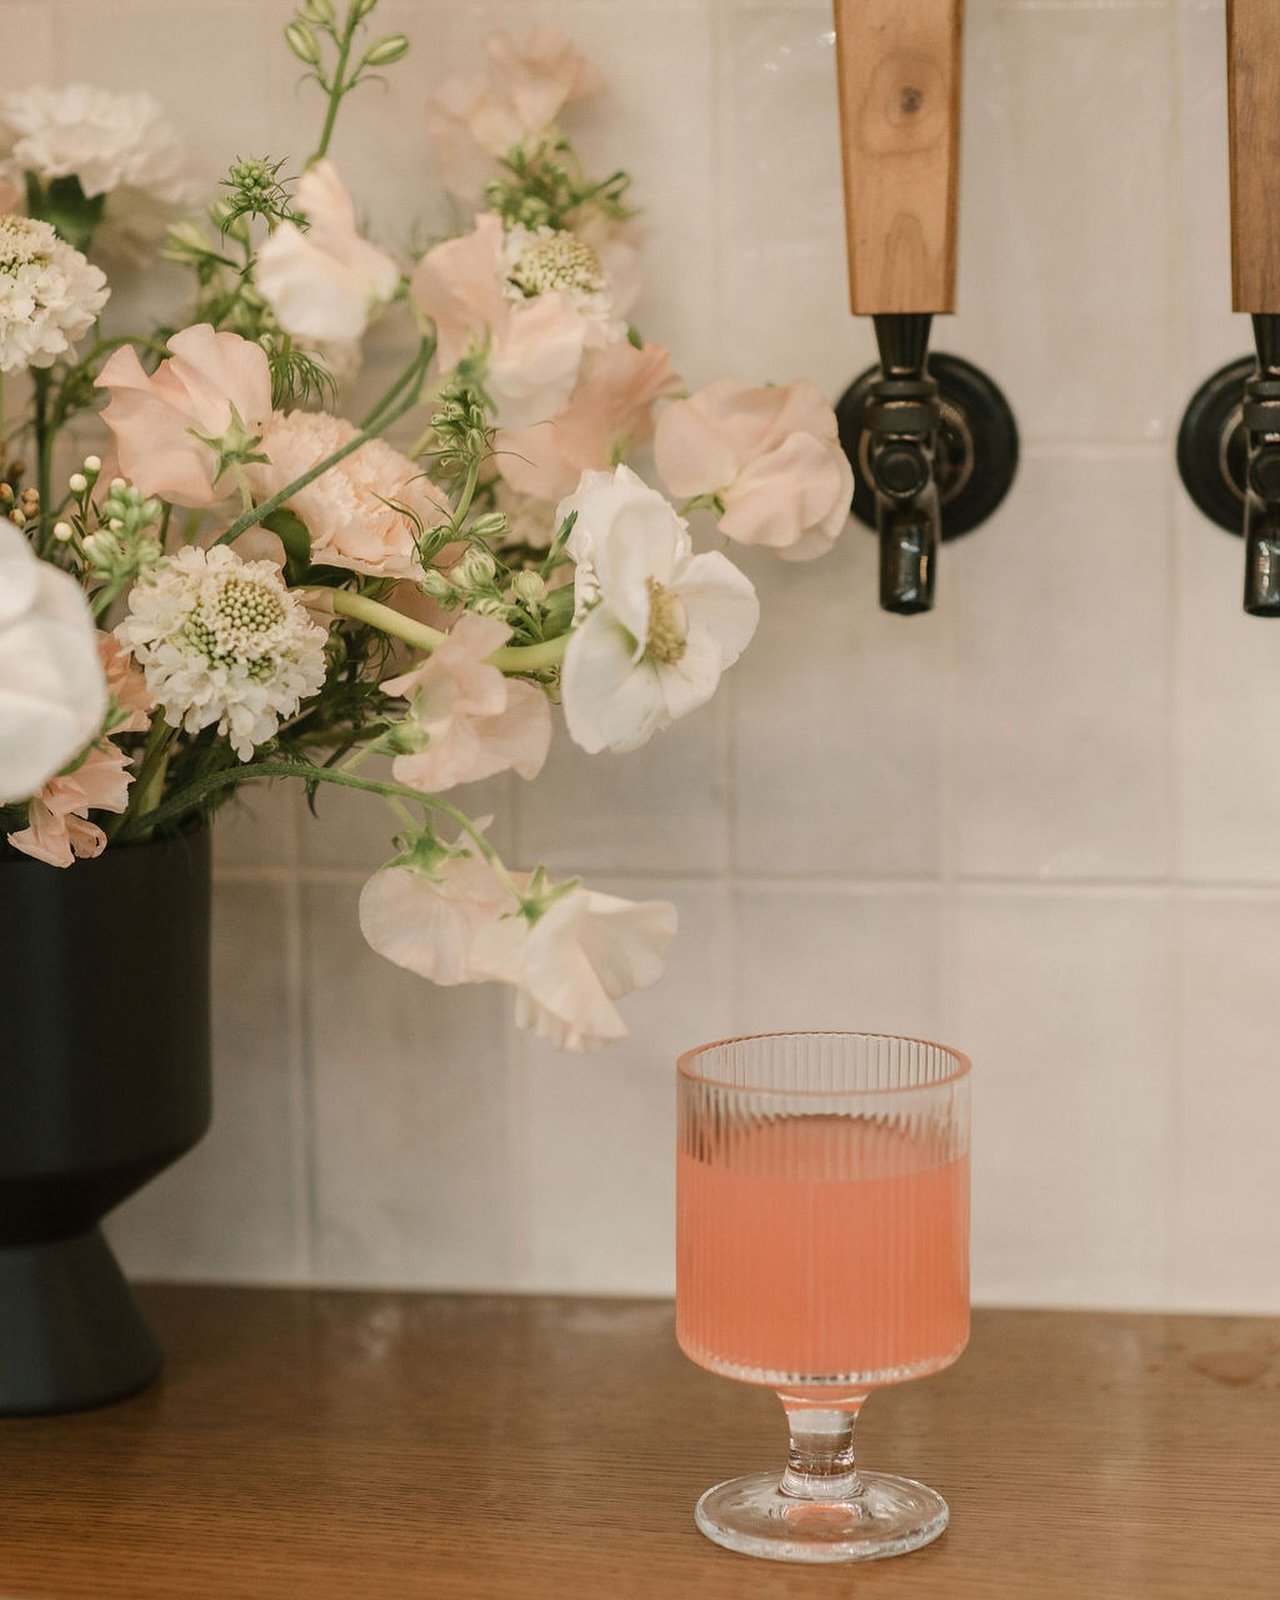 Let&rsquo;s talk about mocktails 🌸

Savor no proof versions of classic cocktails like margaritas and mojitos, or indulge in nitro coffees, Italian soda&rsquo;s, sparkling lemonade, iced teas or Kombucha from our taps.

They keep everyone refreshed, 